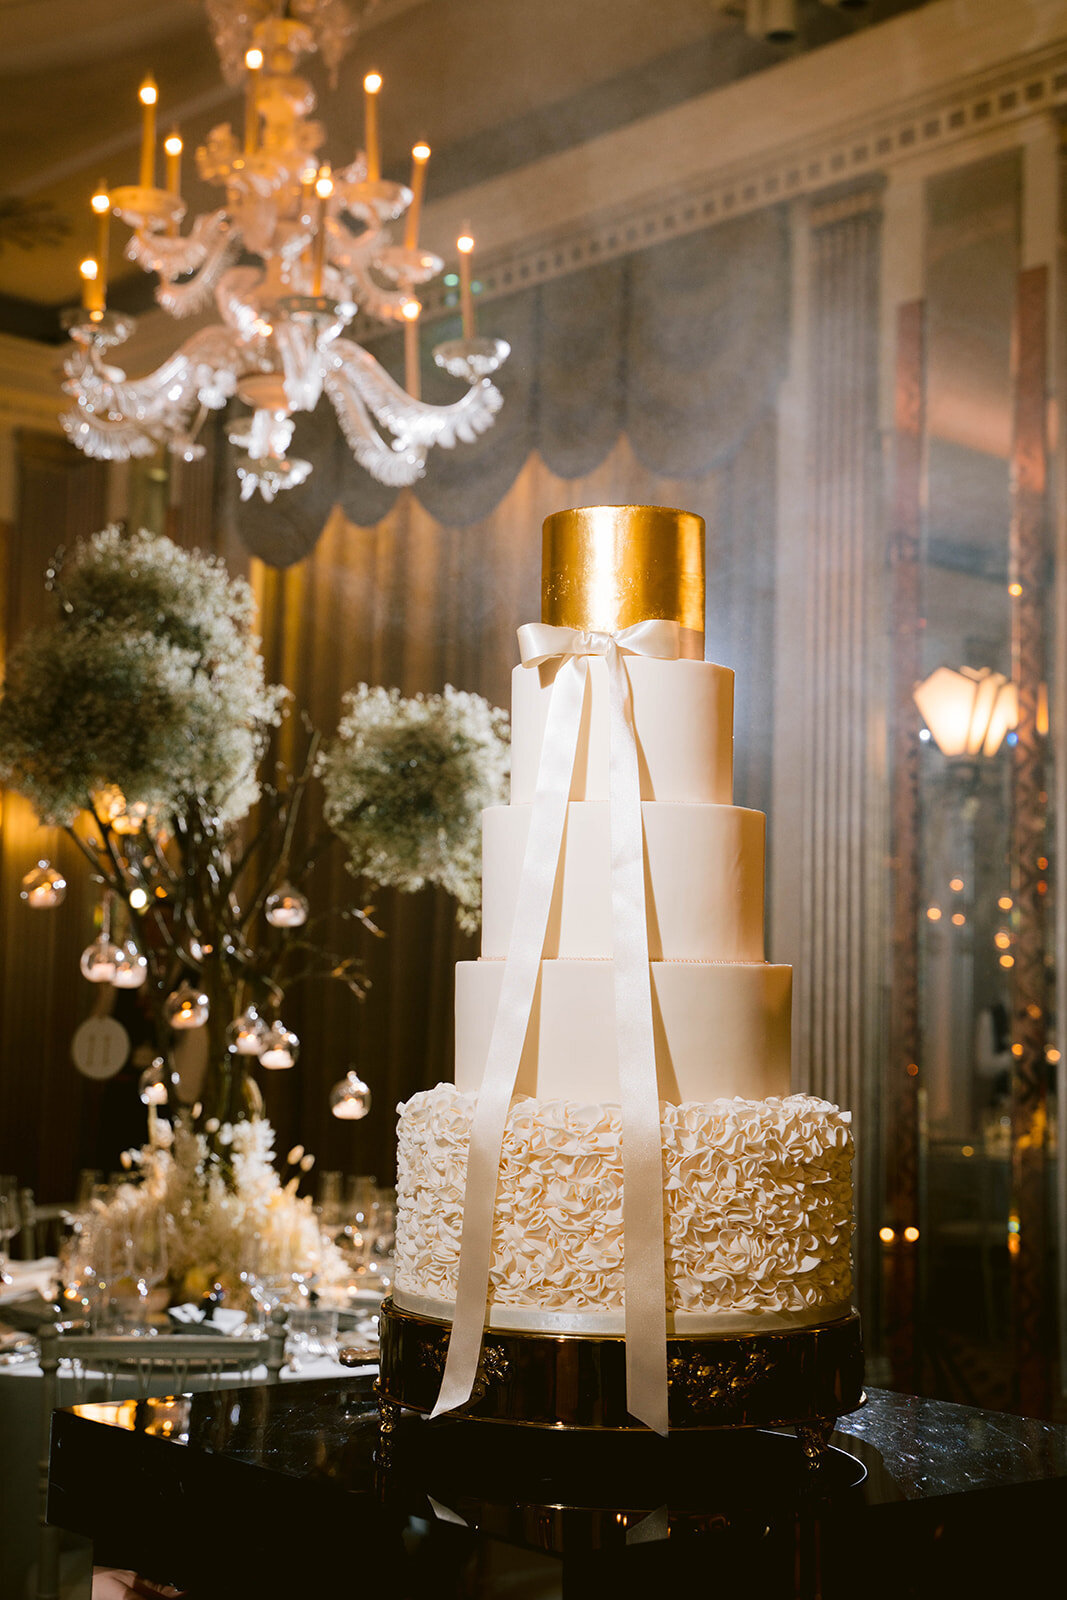 Wedding cake is in the Claridges ballroom with smoke in the background the cake has a gold tear a ruffle tear and a ribbon